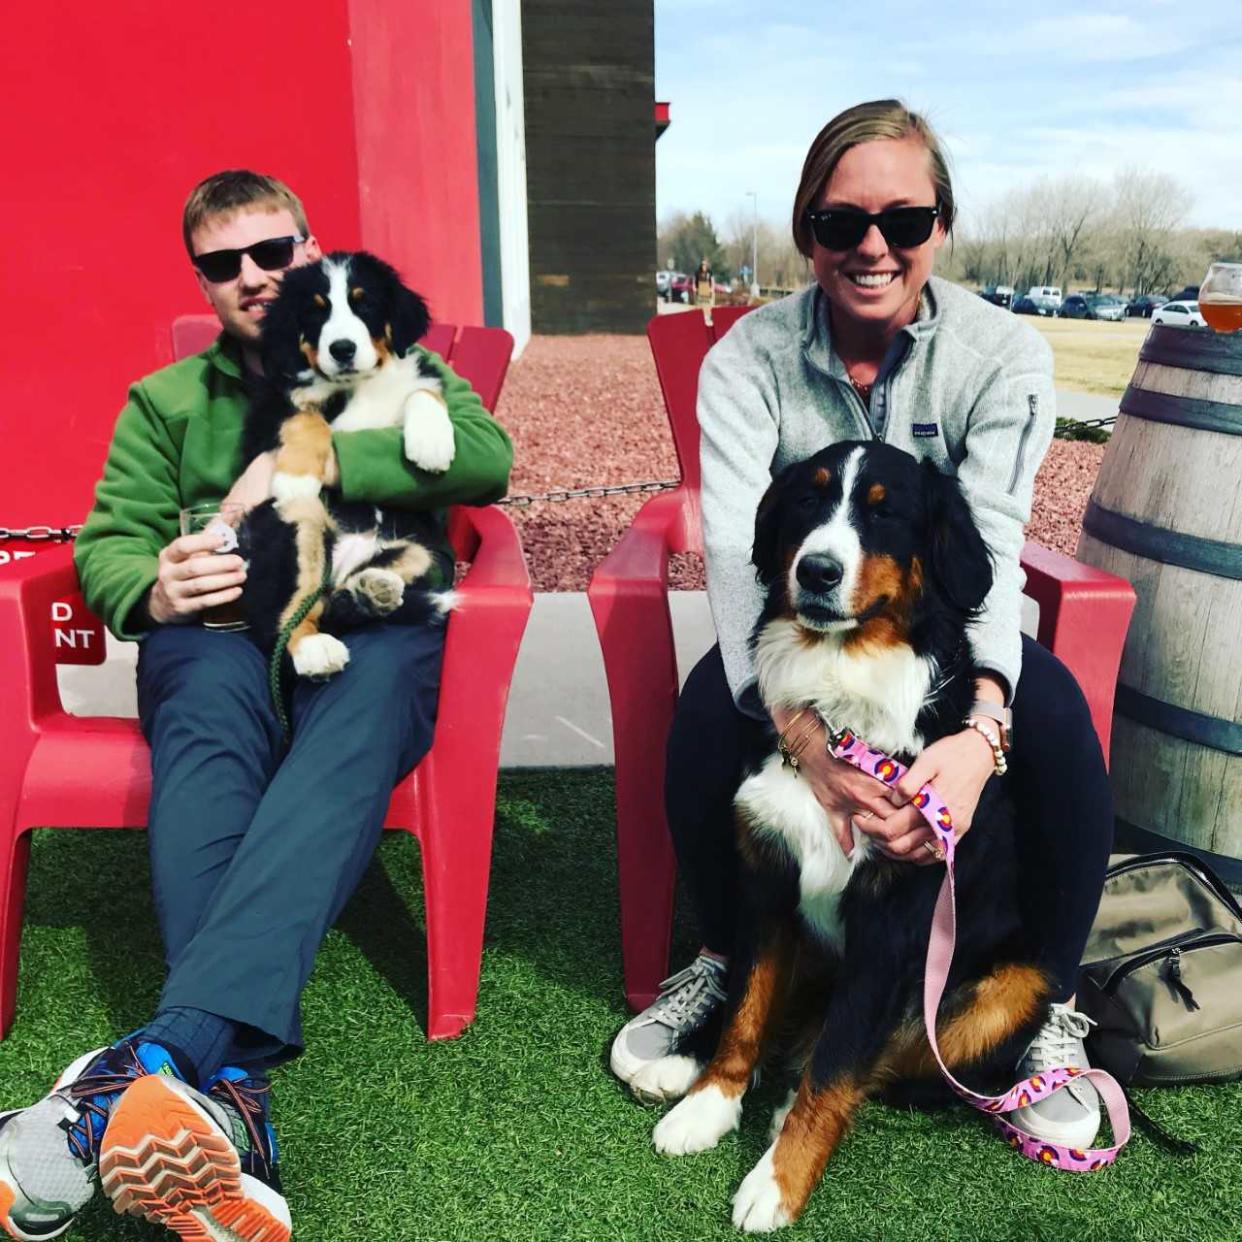 Kyle and Megan Casey hope to open Paws and Pints next year. They recently visited a brewery in Boulder, Colorado, with their Bernese mountain dogs Porter (left) and Kora.